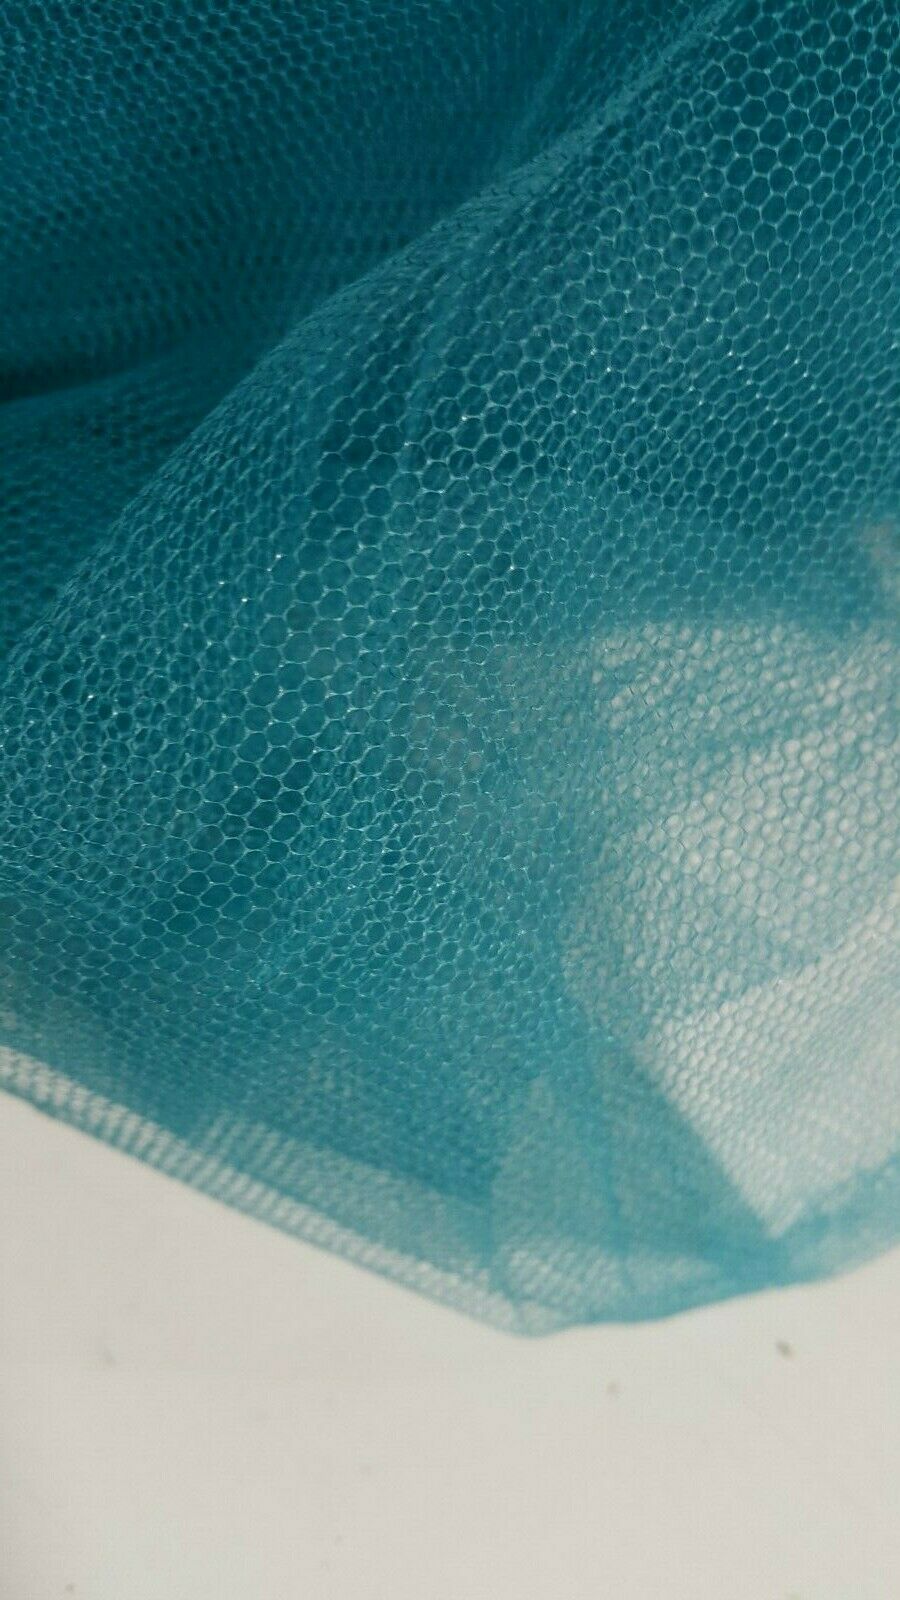 NET TULLE FABRIC PLAIN SOLD BY THE METER